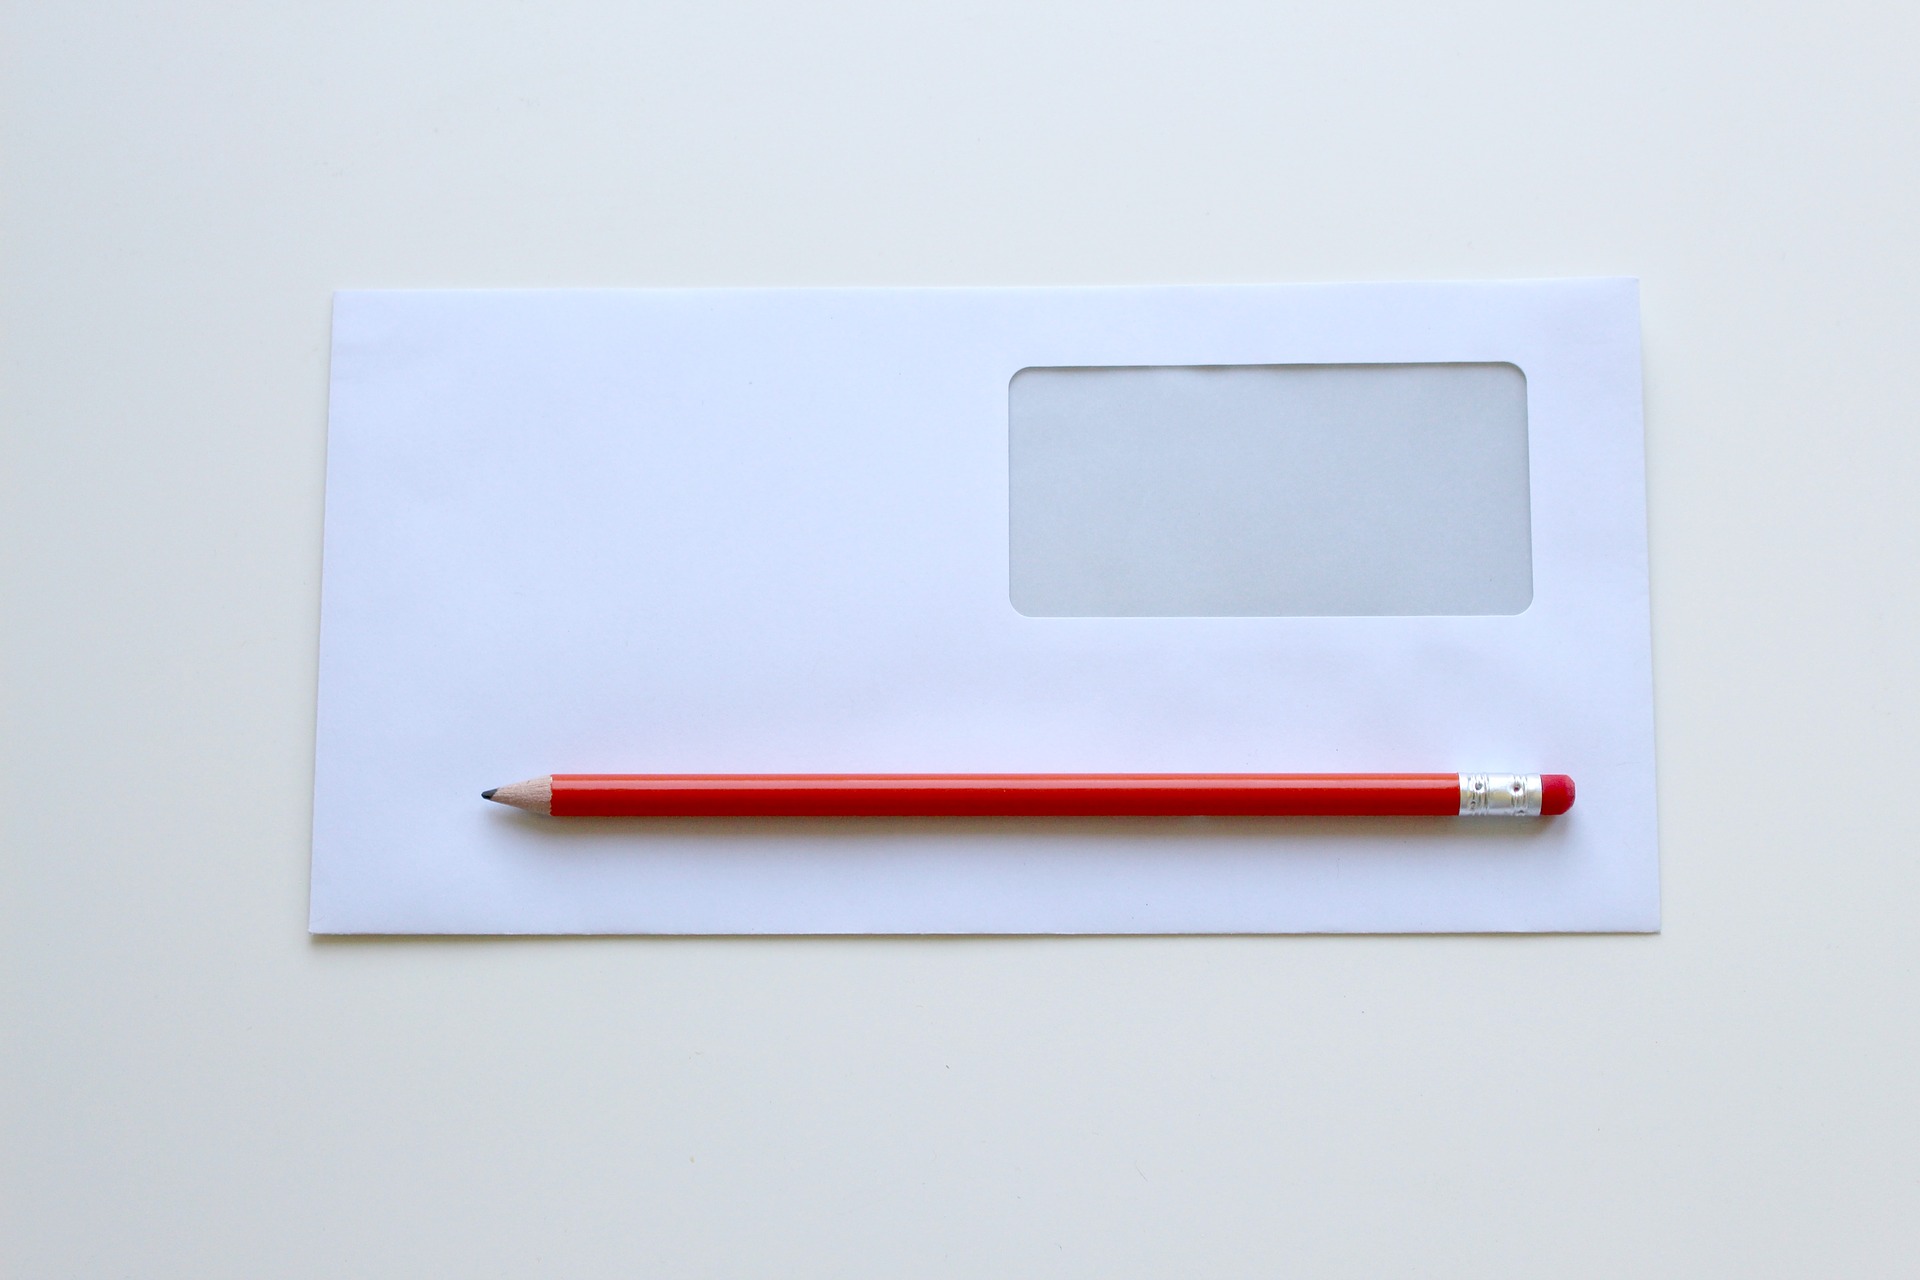 The windowed envelope is a great way to save yourself from having to print on envelopes and letters.